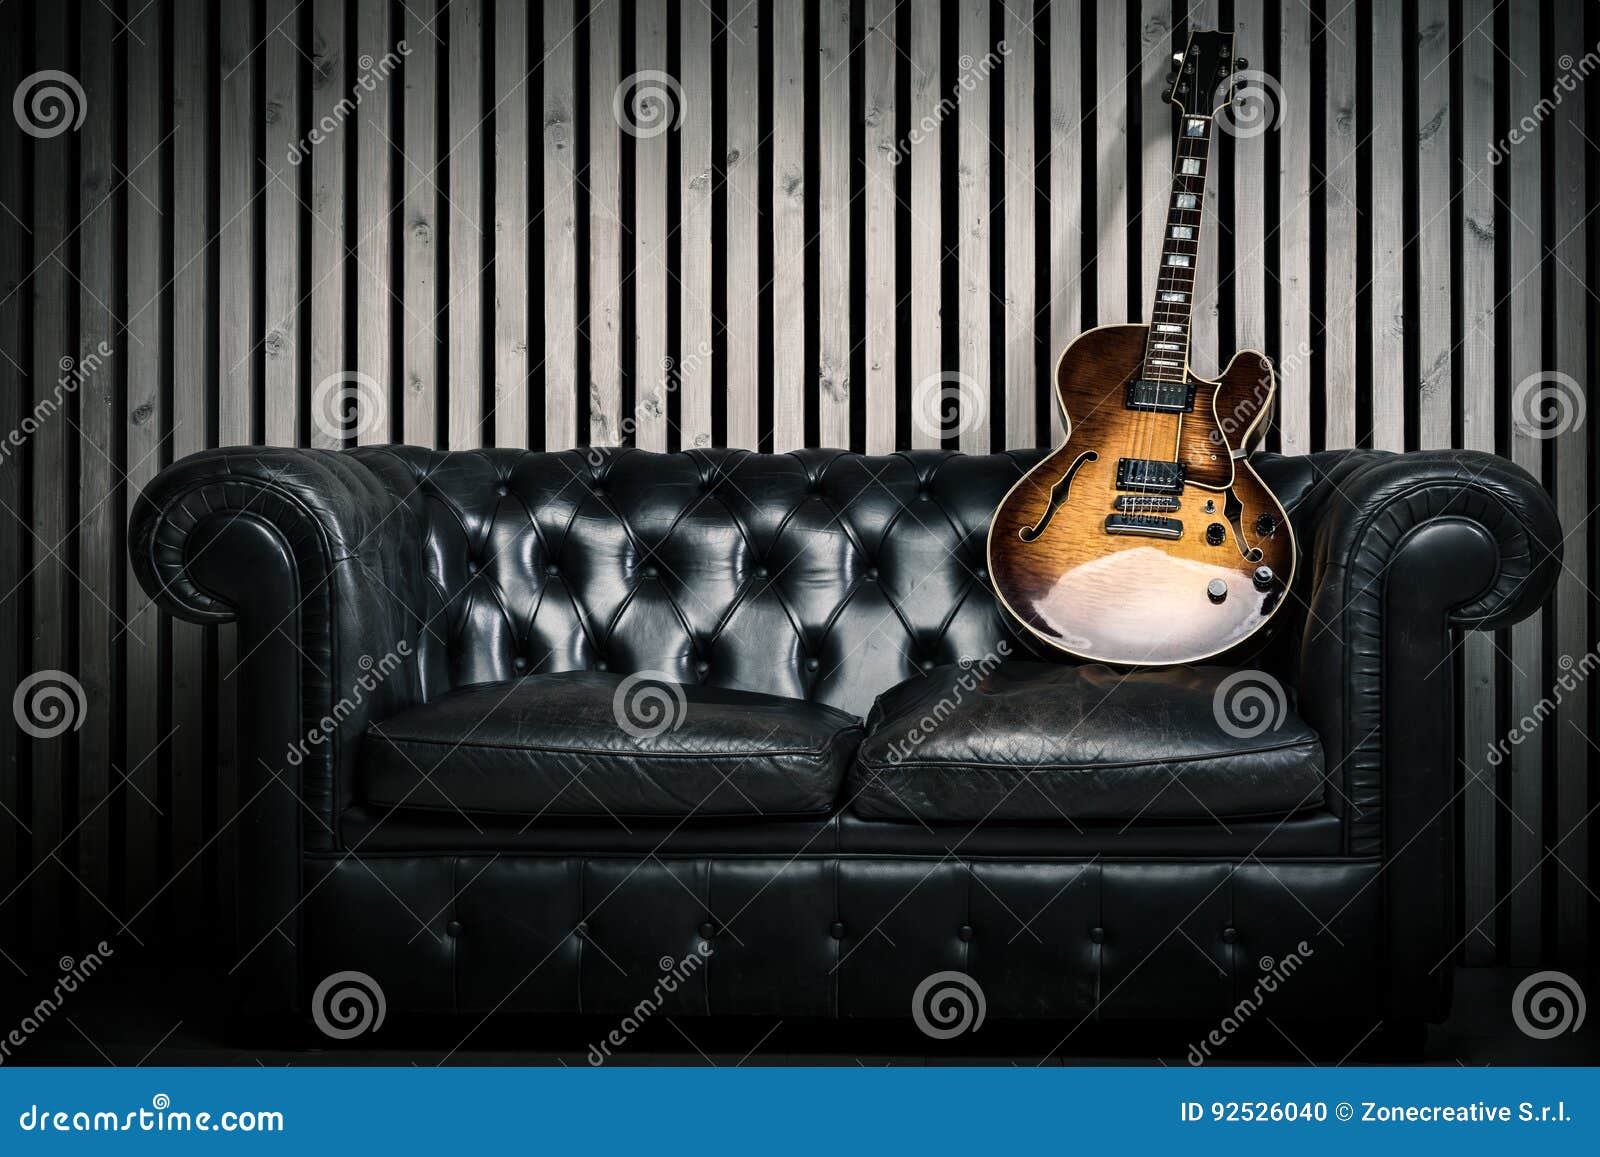 Empty Vintage Sofa And Electric Guitar With Modern Wood Wall Recording Studio Background Music Concept With Nobody Stock Photo Image Of Cool Concert 92526040